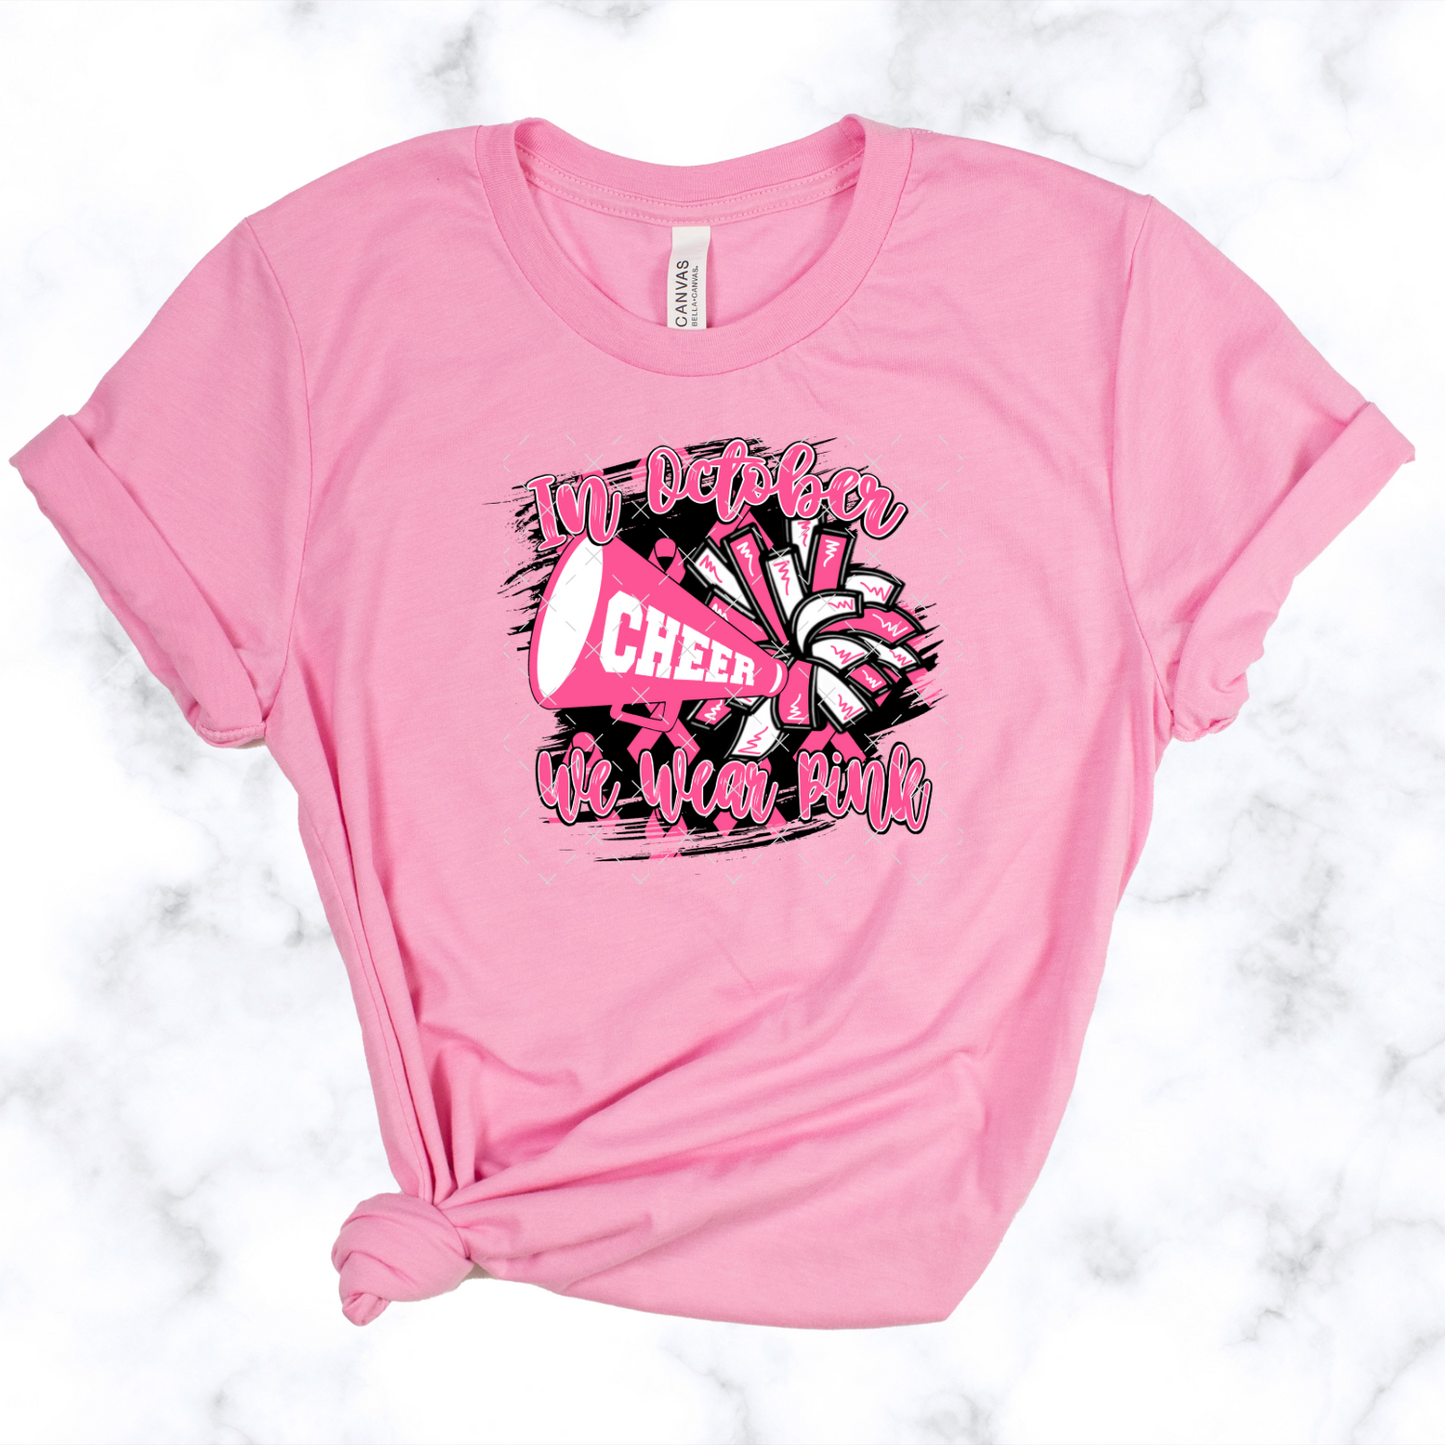 In October We Wear Pink Cheer Tee Youth